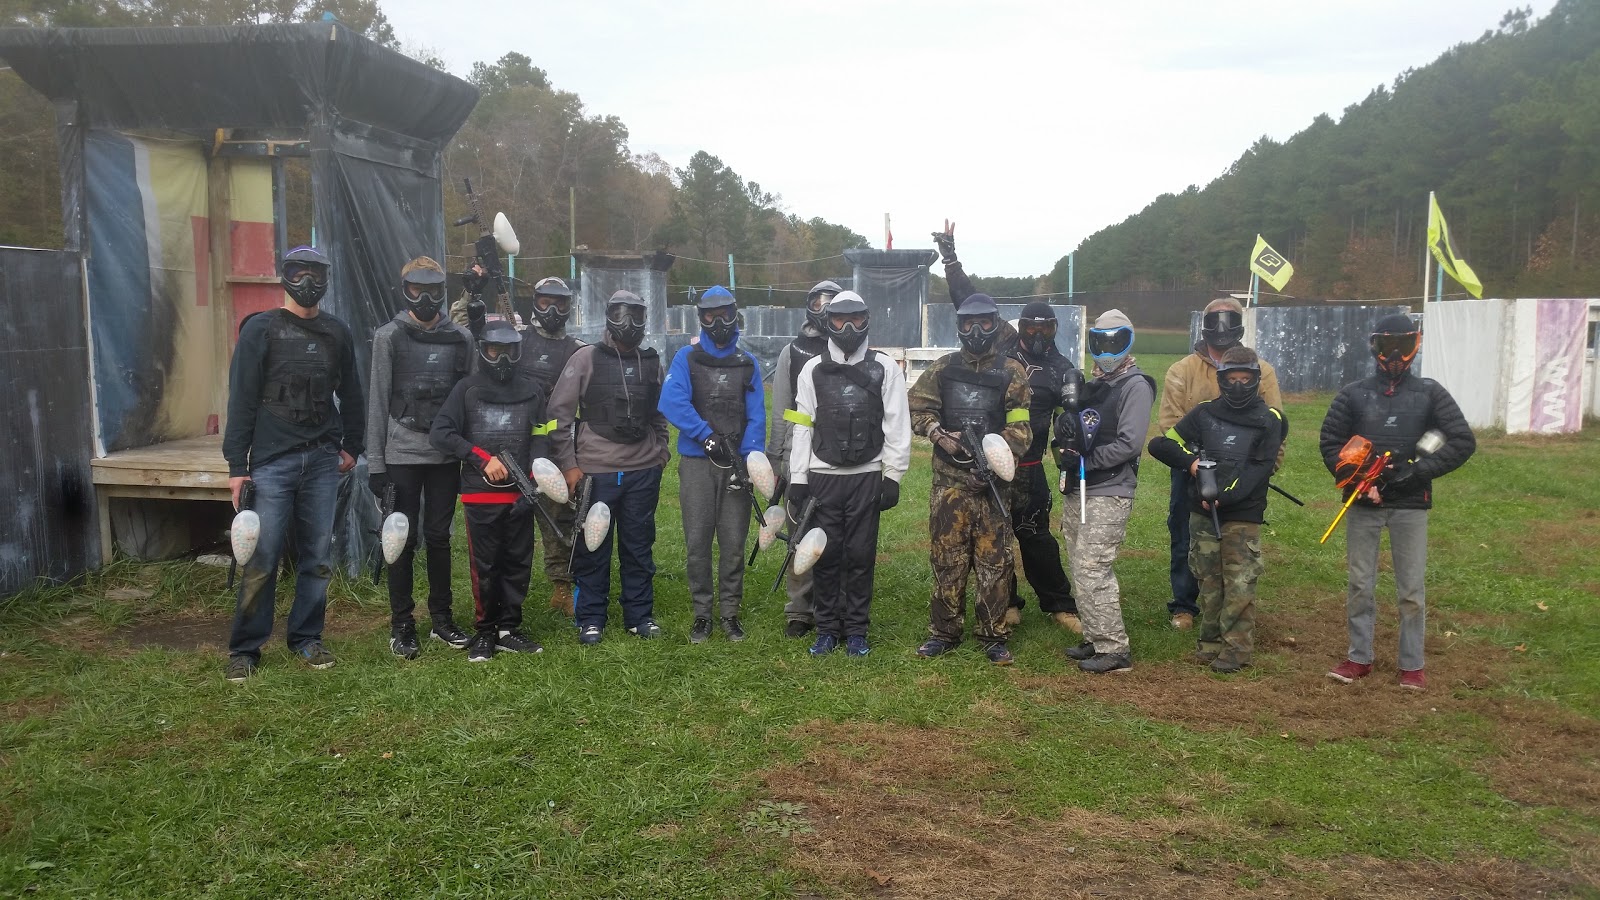 How Much Does Paintball Cost? — Precision Paintball